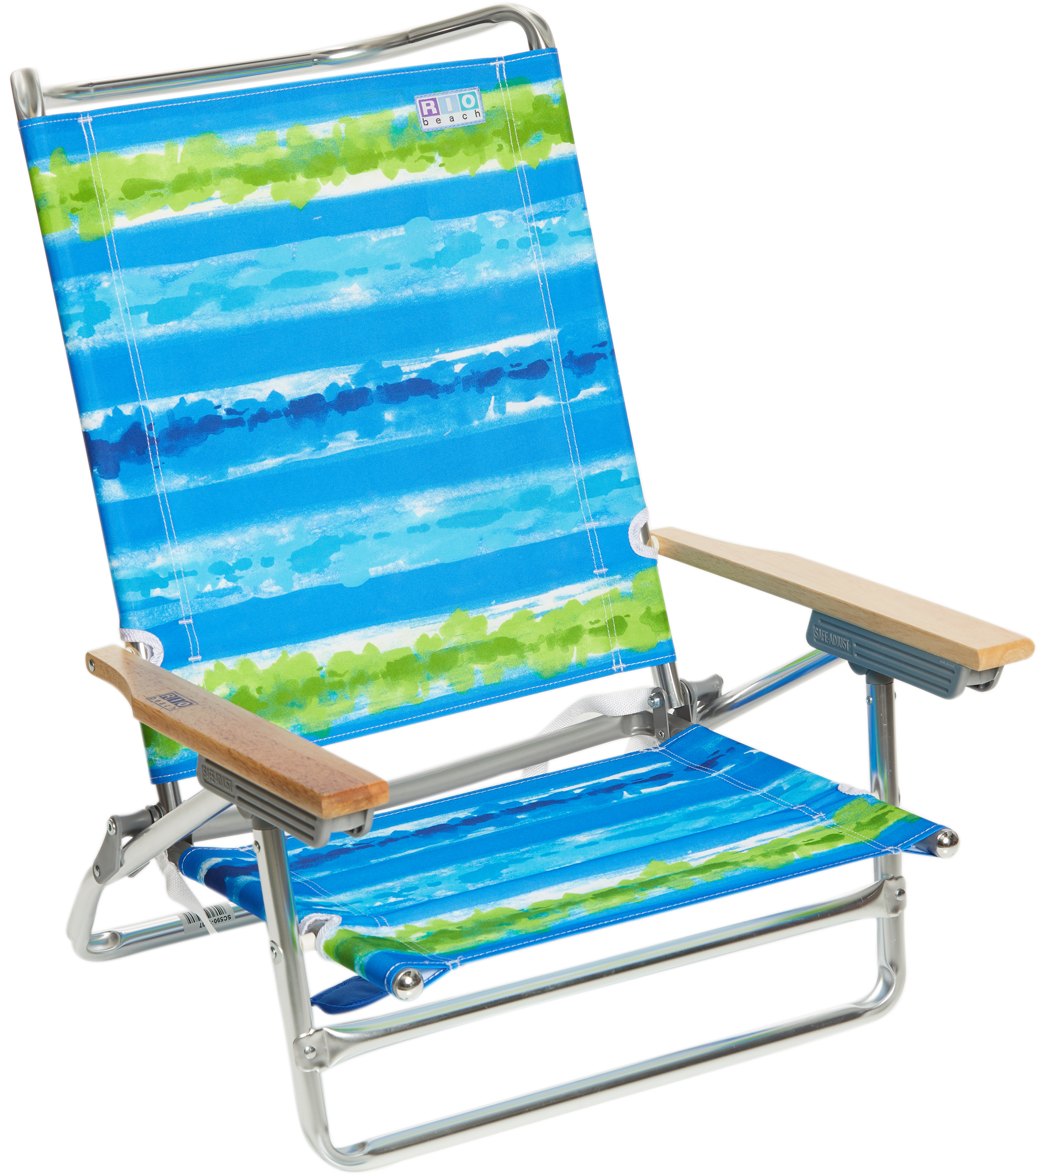 Rio Brands 5 Position Beach Chair at SwimOutlet.com - Free Shipping